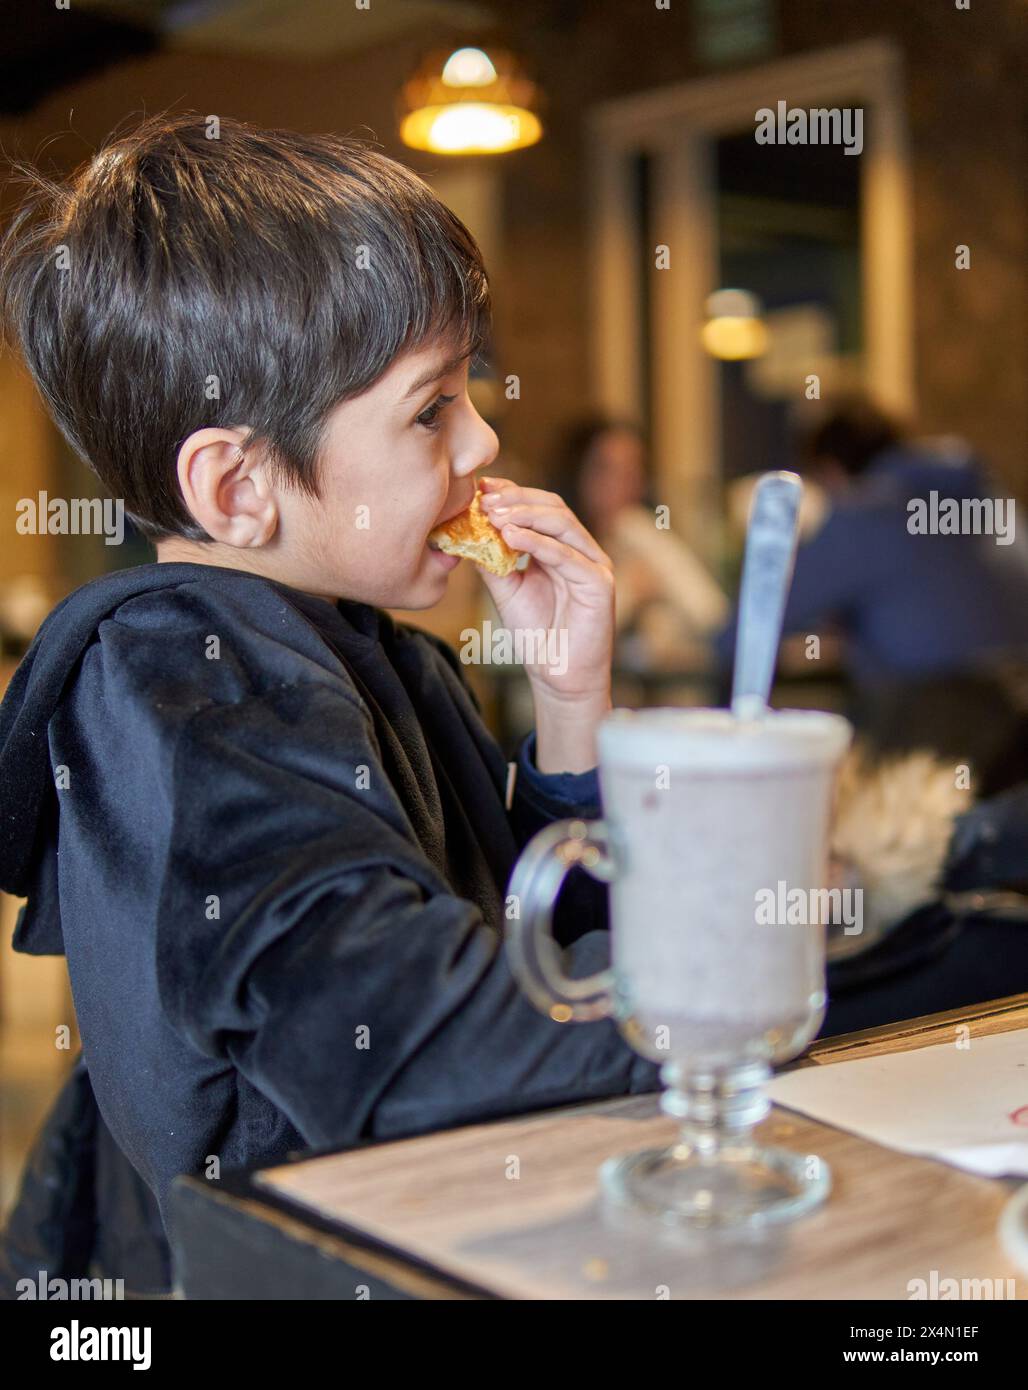 Latino child snacking on a croissant and a chocolate milk at a bar in Argentina. Stock Photo